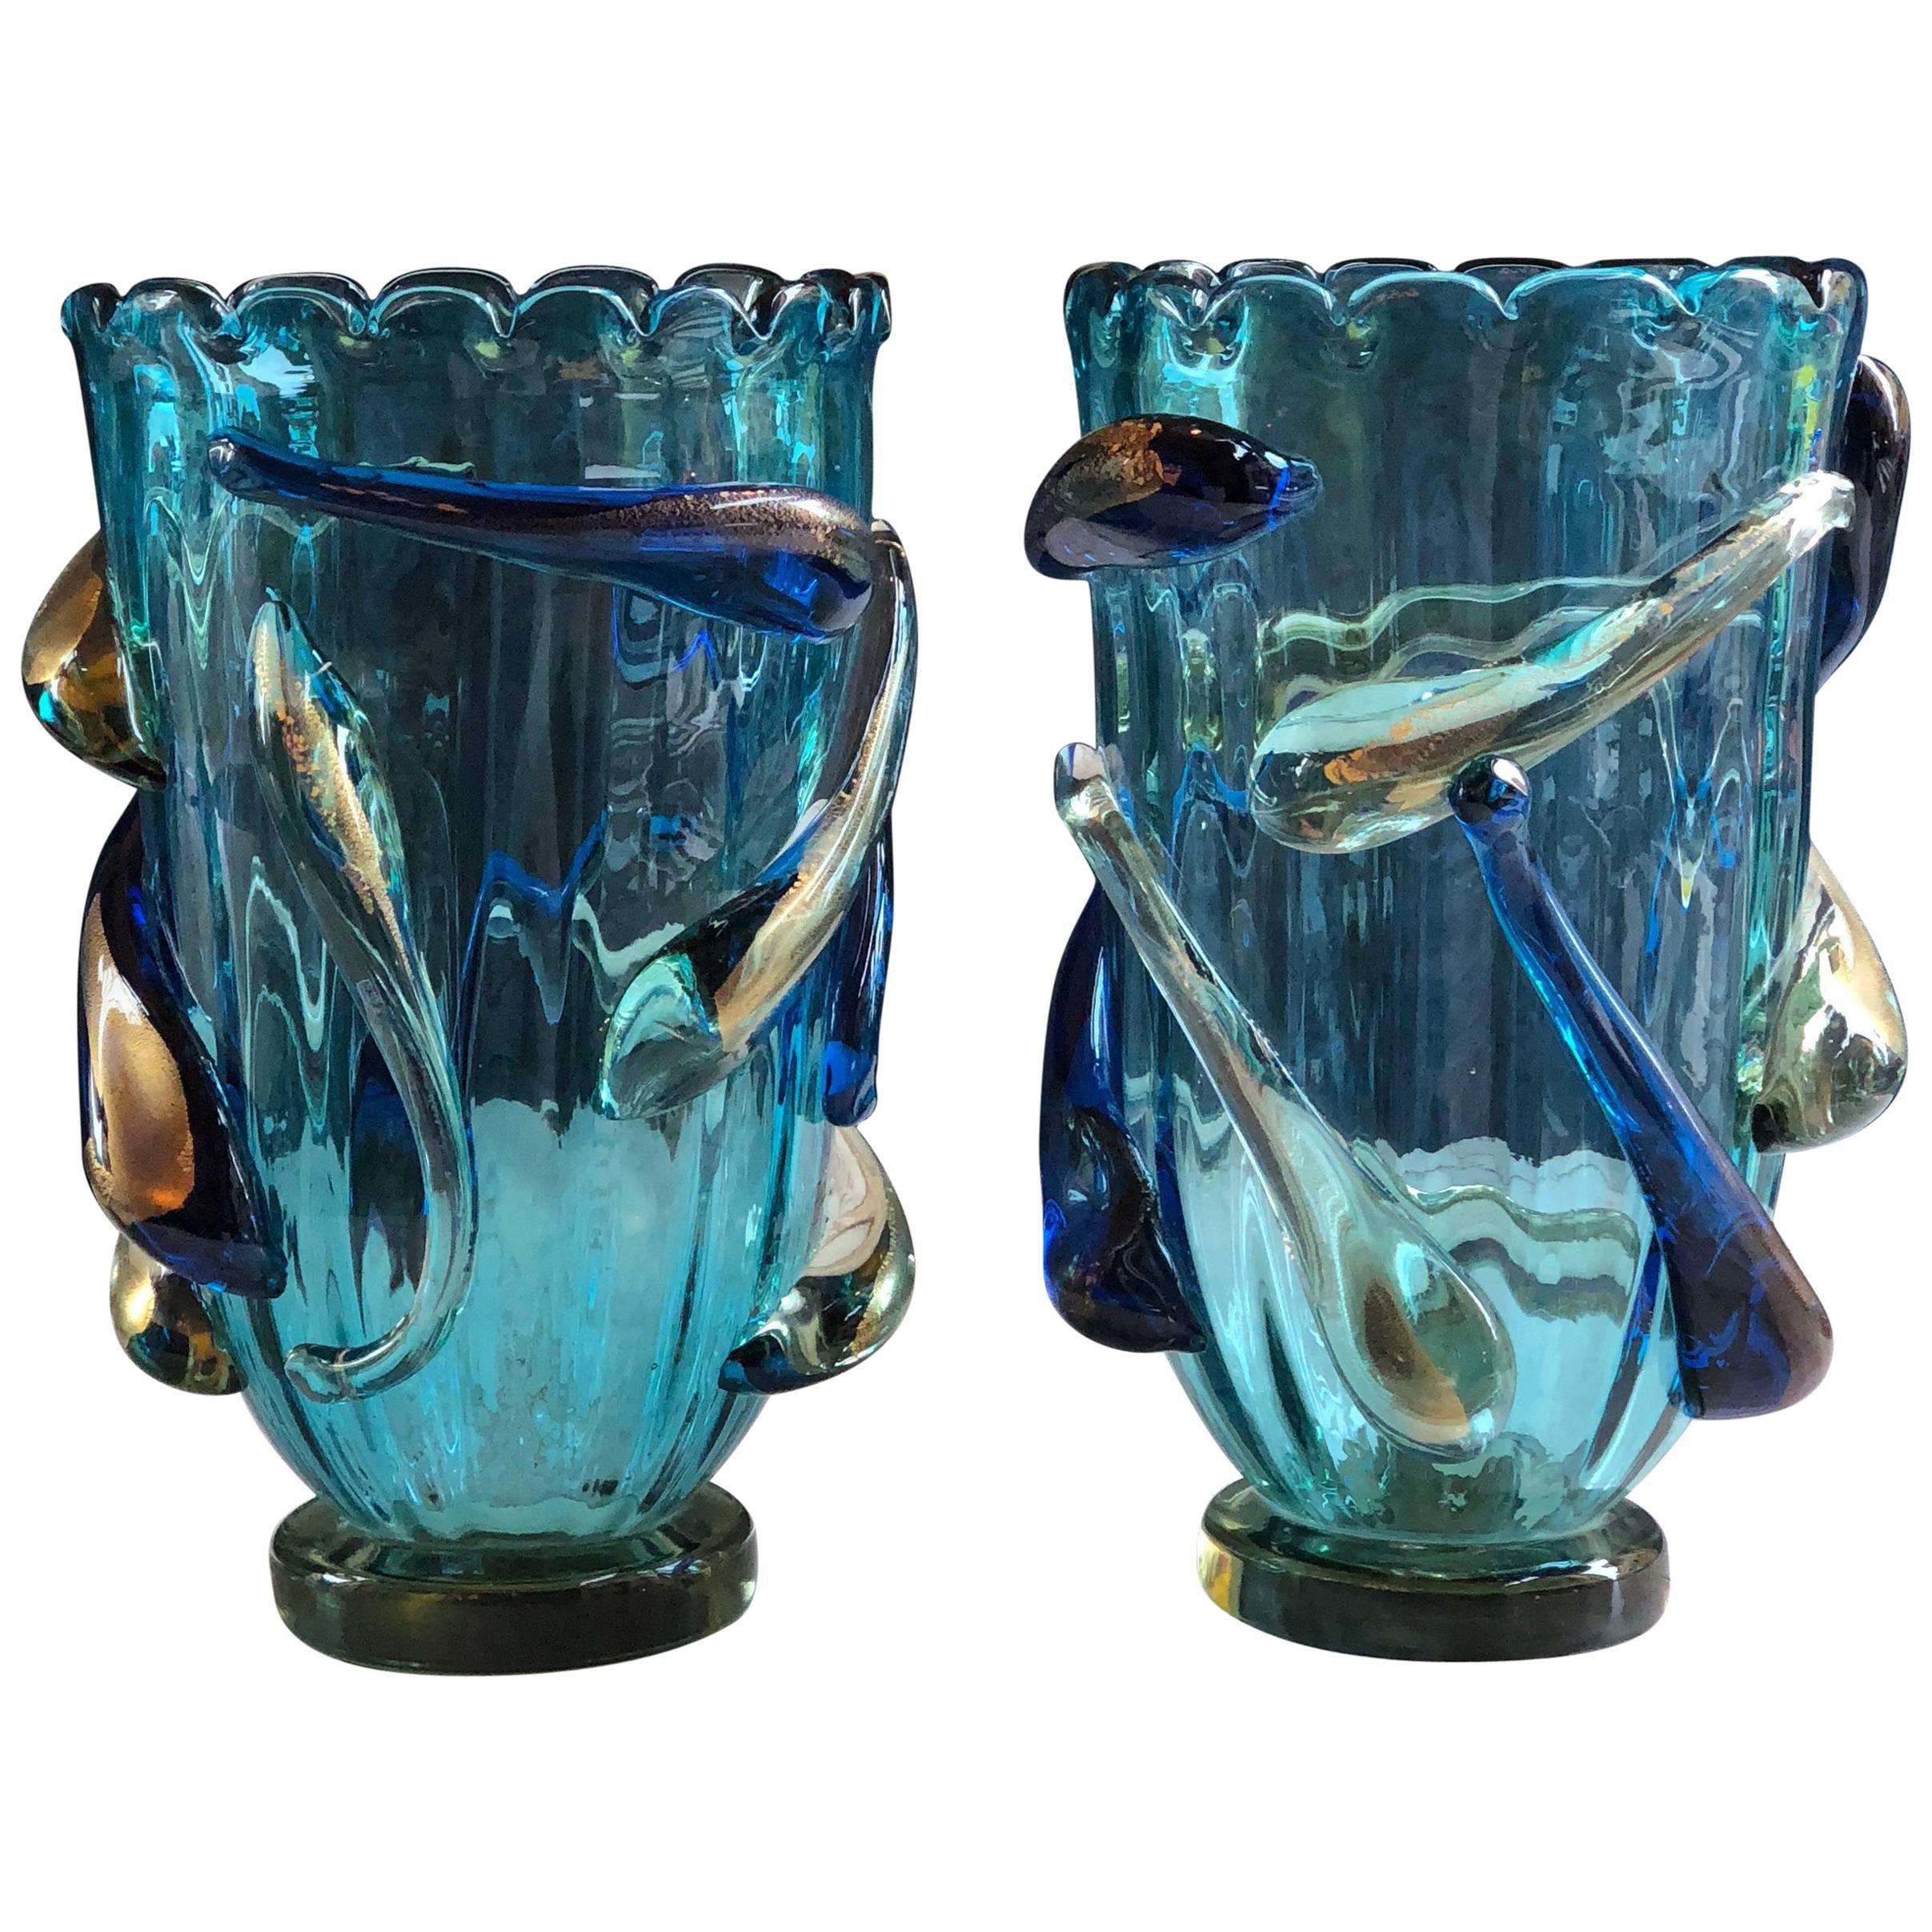 Late 20th Century Pair of Turquoise Blue & Gold Murano Glass Vases by Costantini